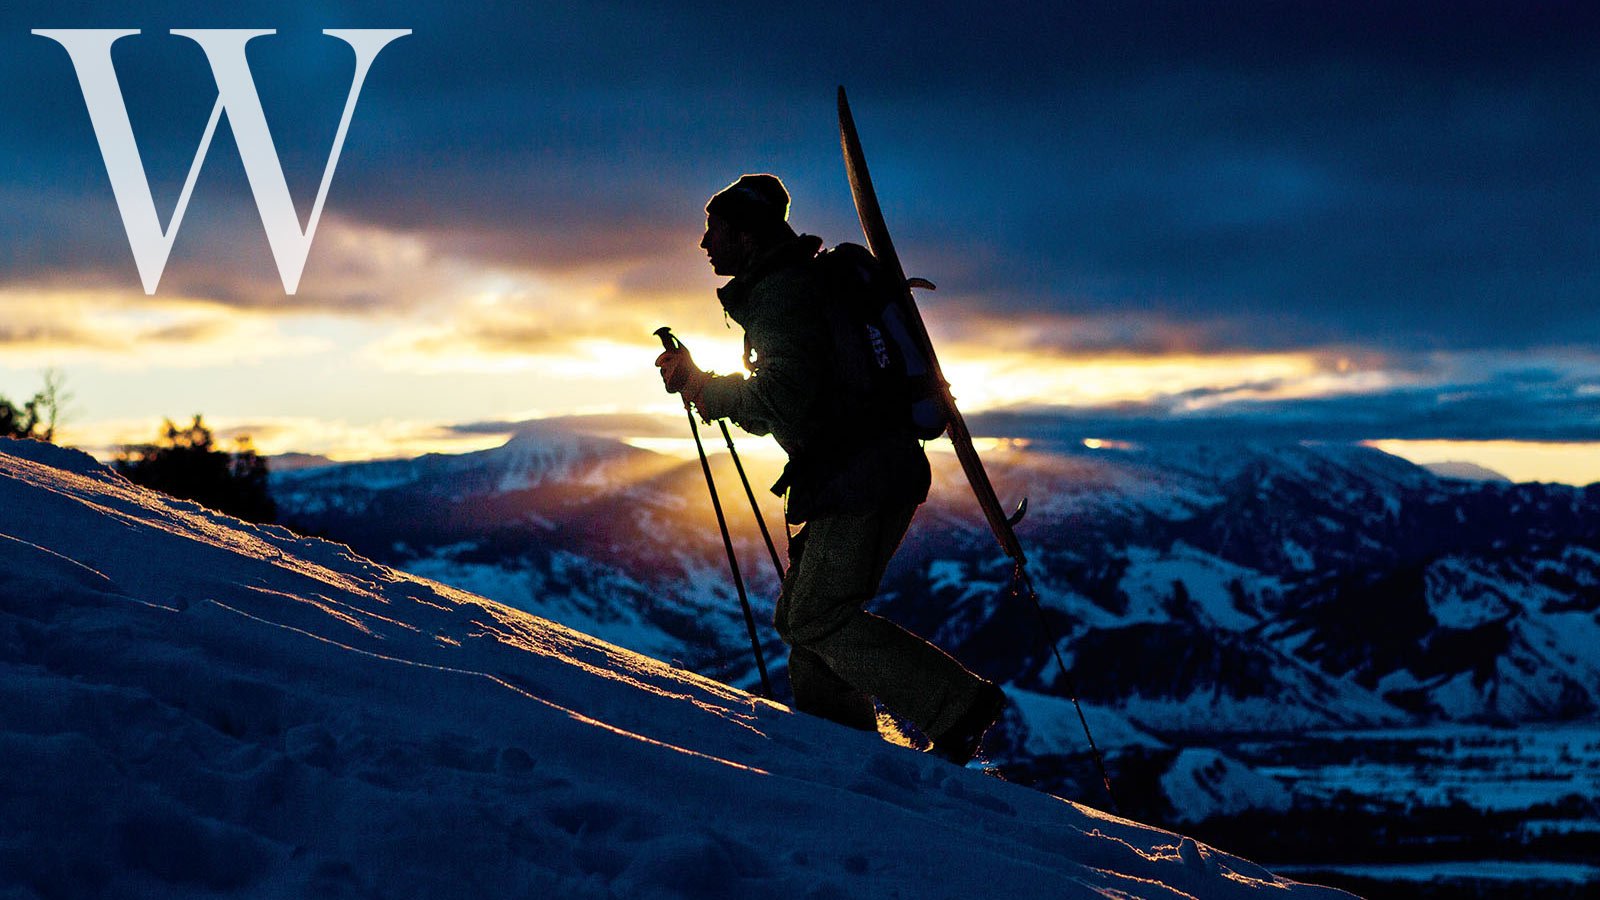 Wallpaper Wednesday The Boundless Backcountry Transworld